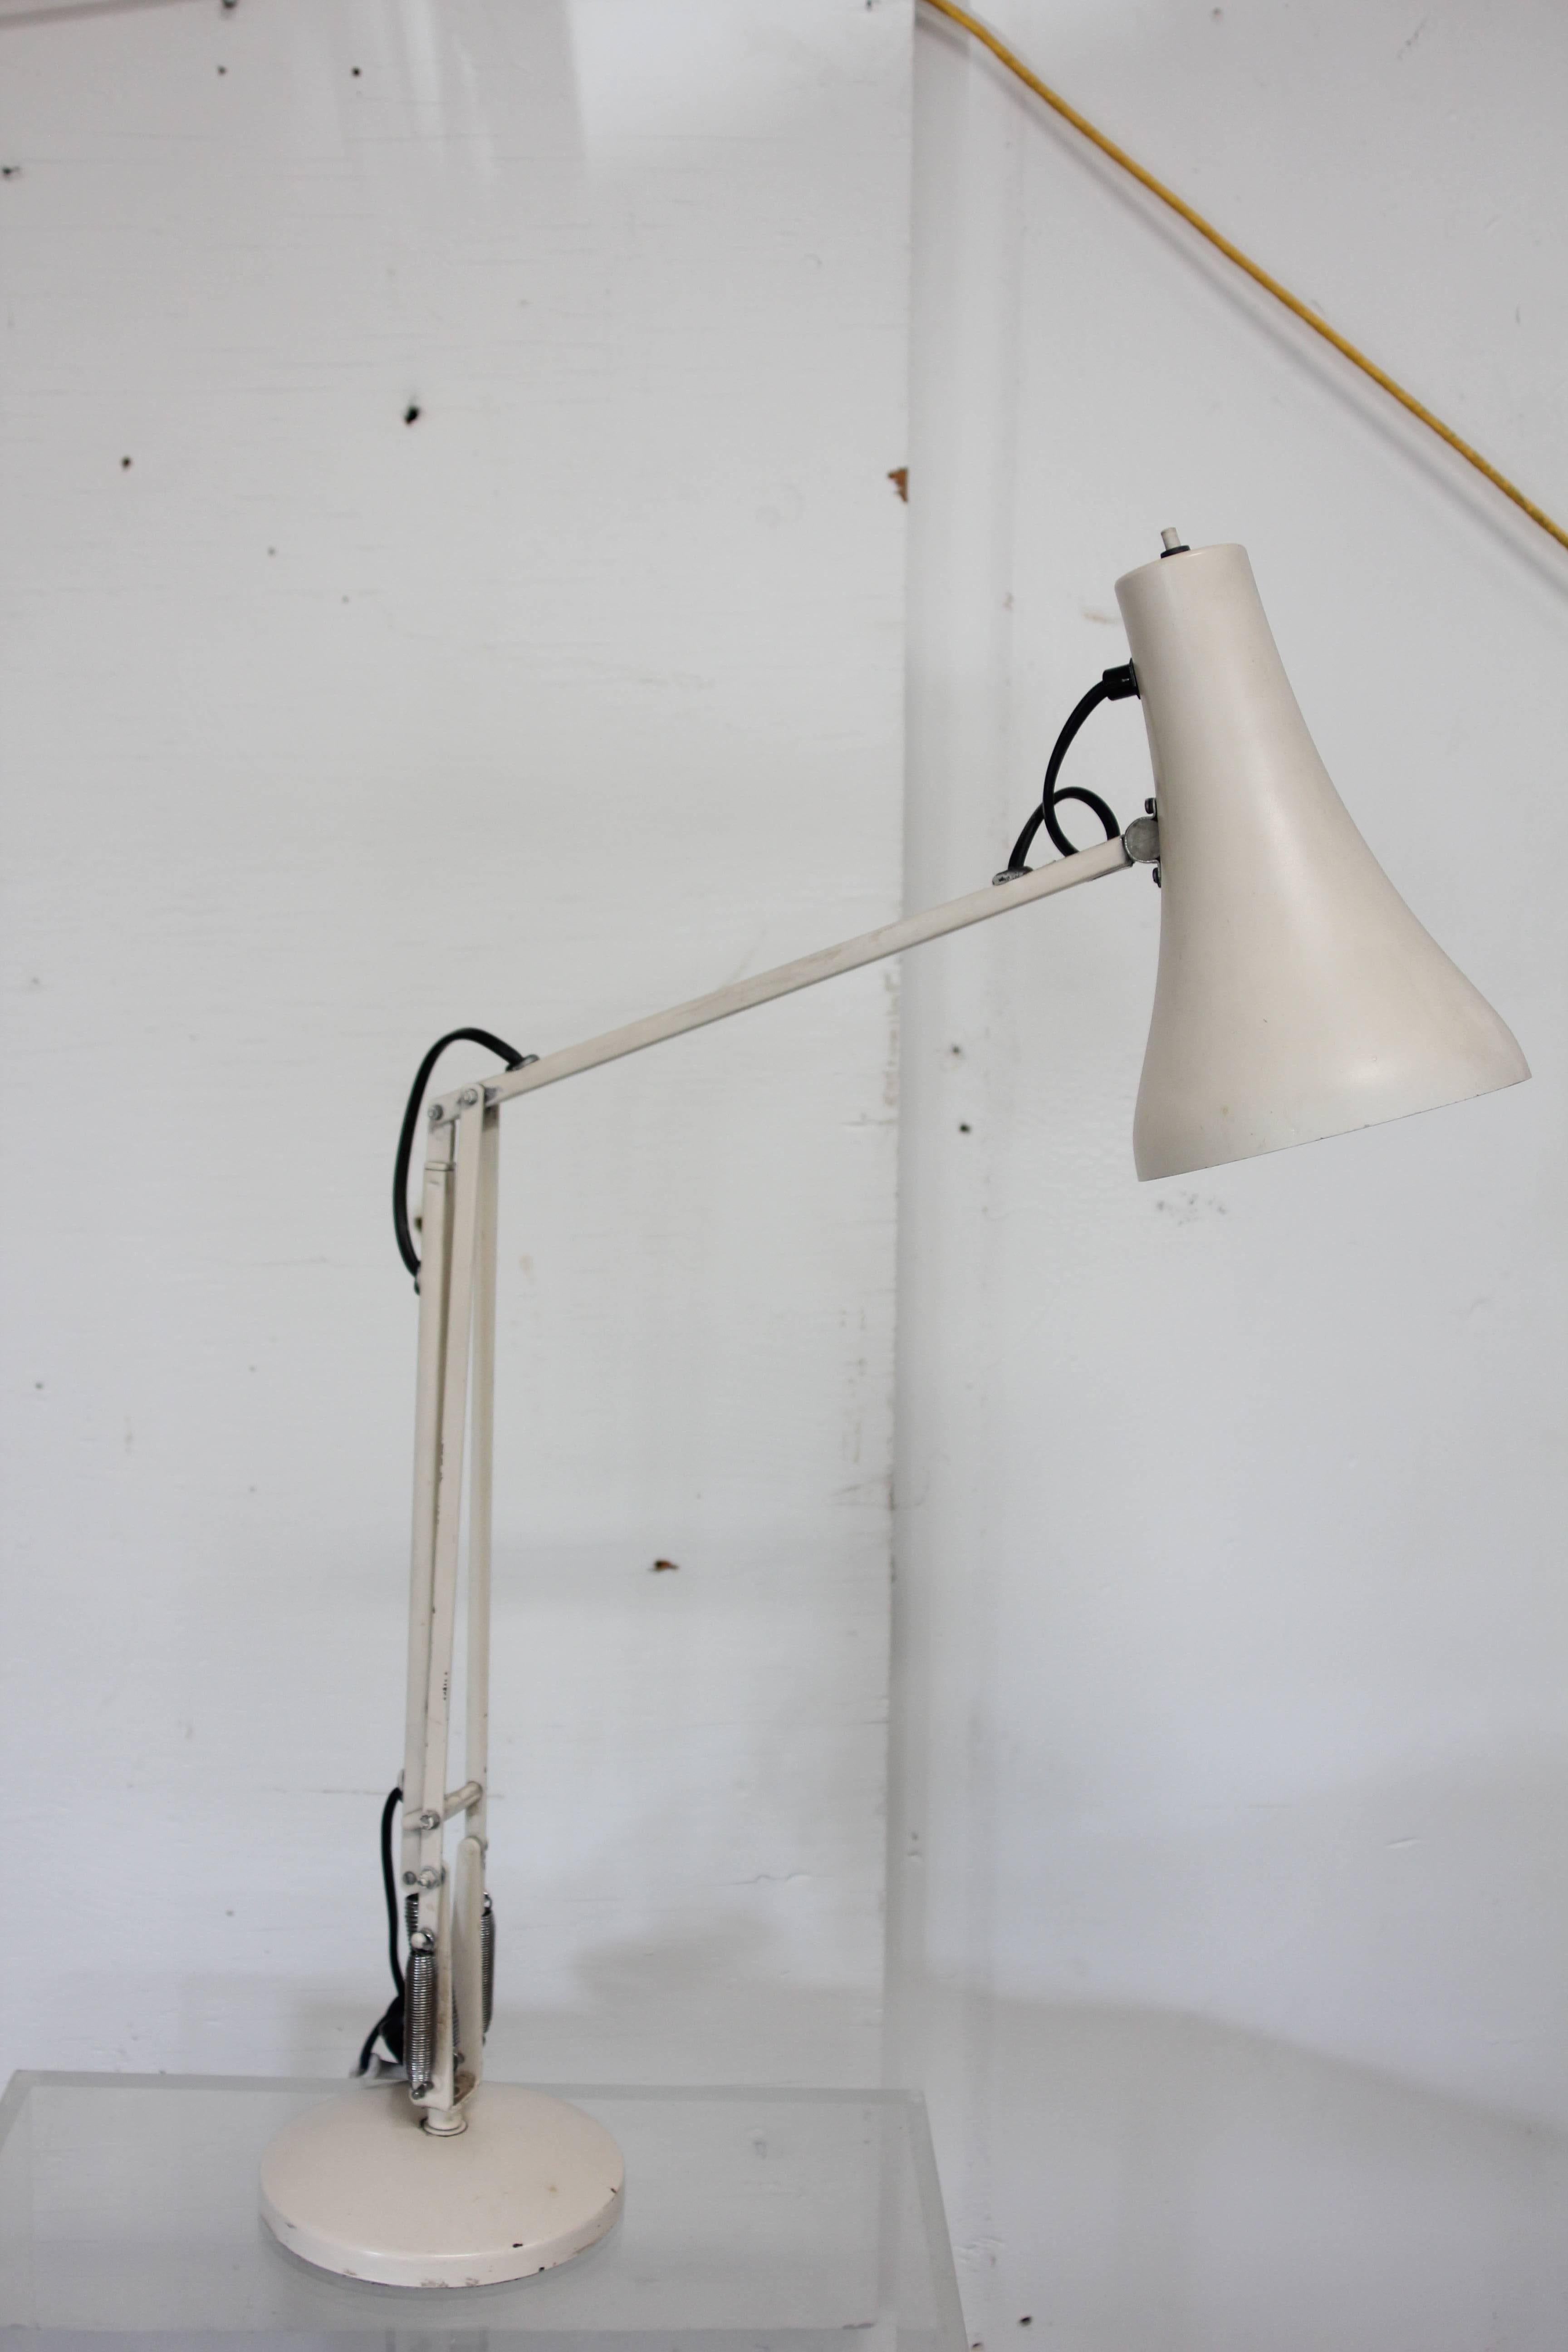 Adjustable Anglepoise desk lamp in original off-white lacquered metal. Shade is 9.0